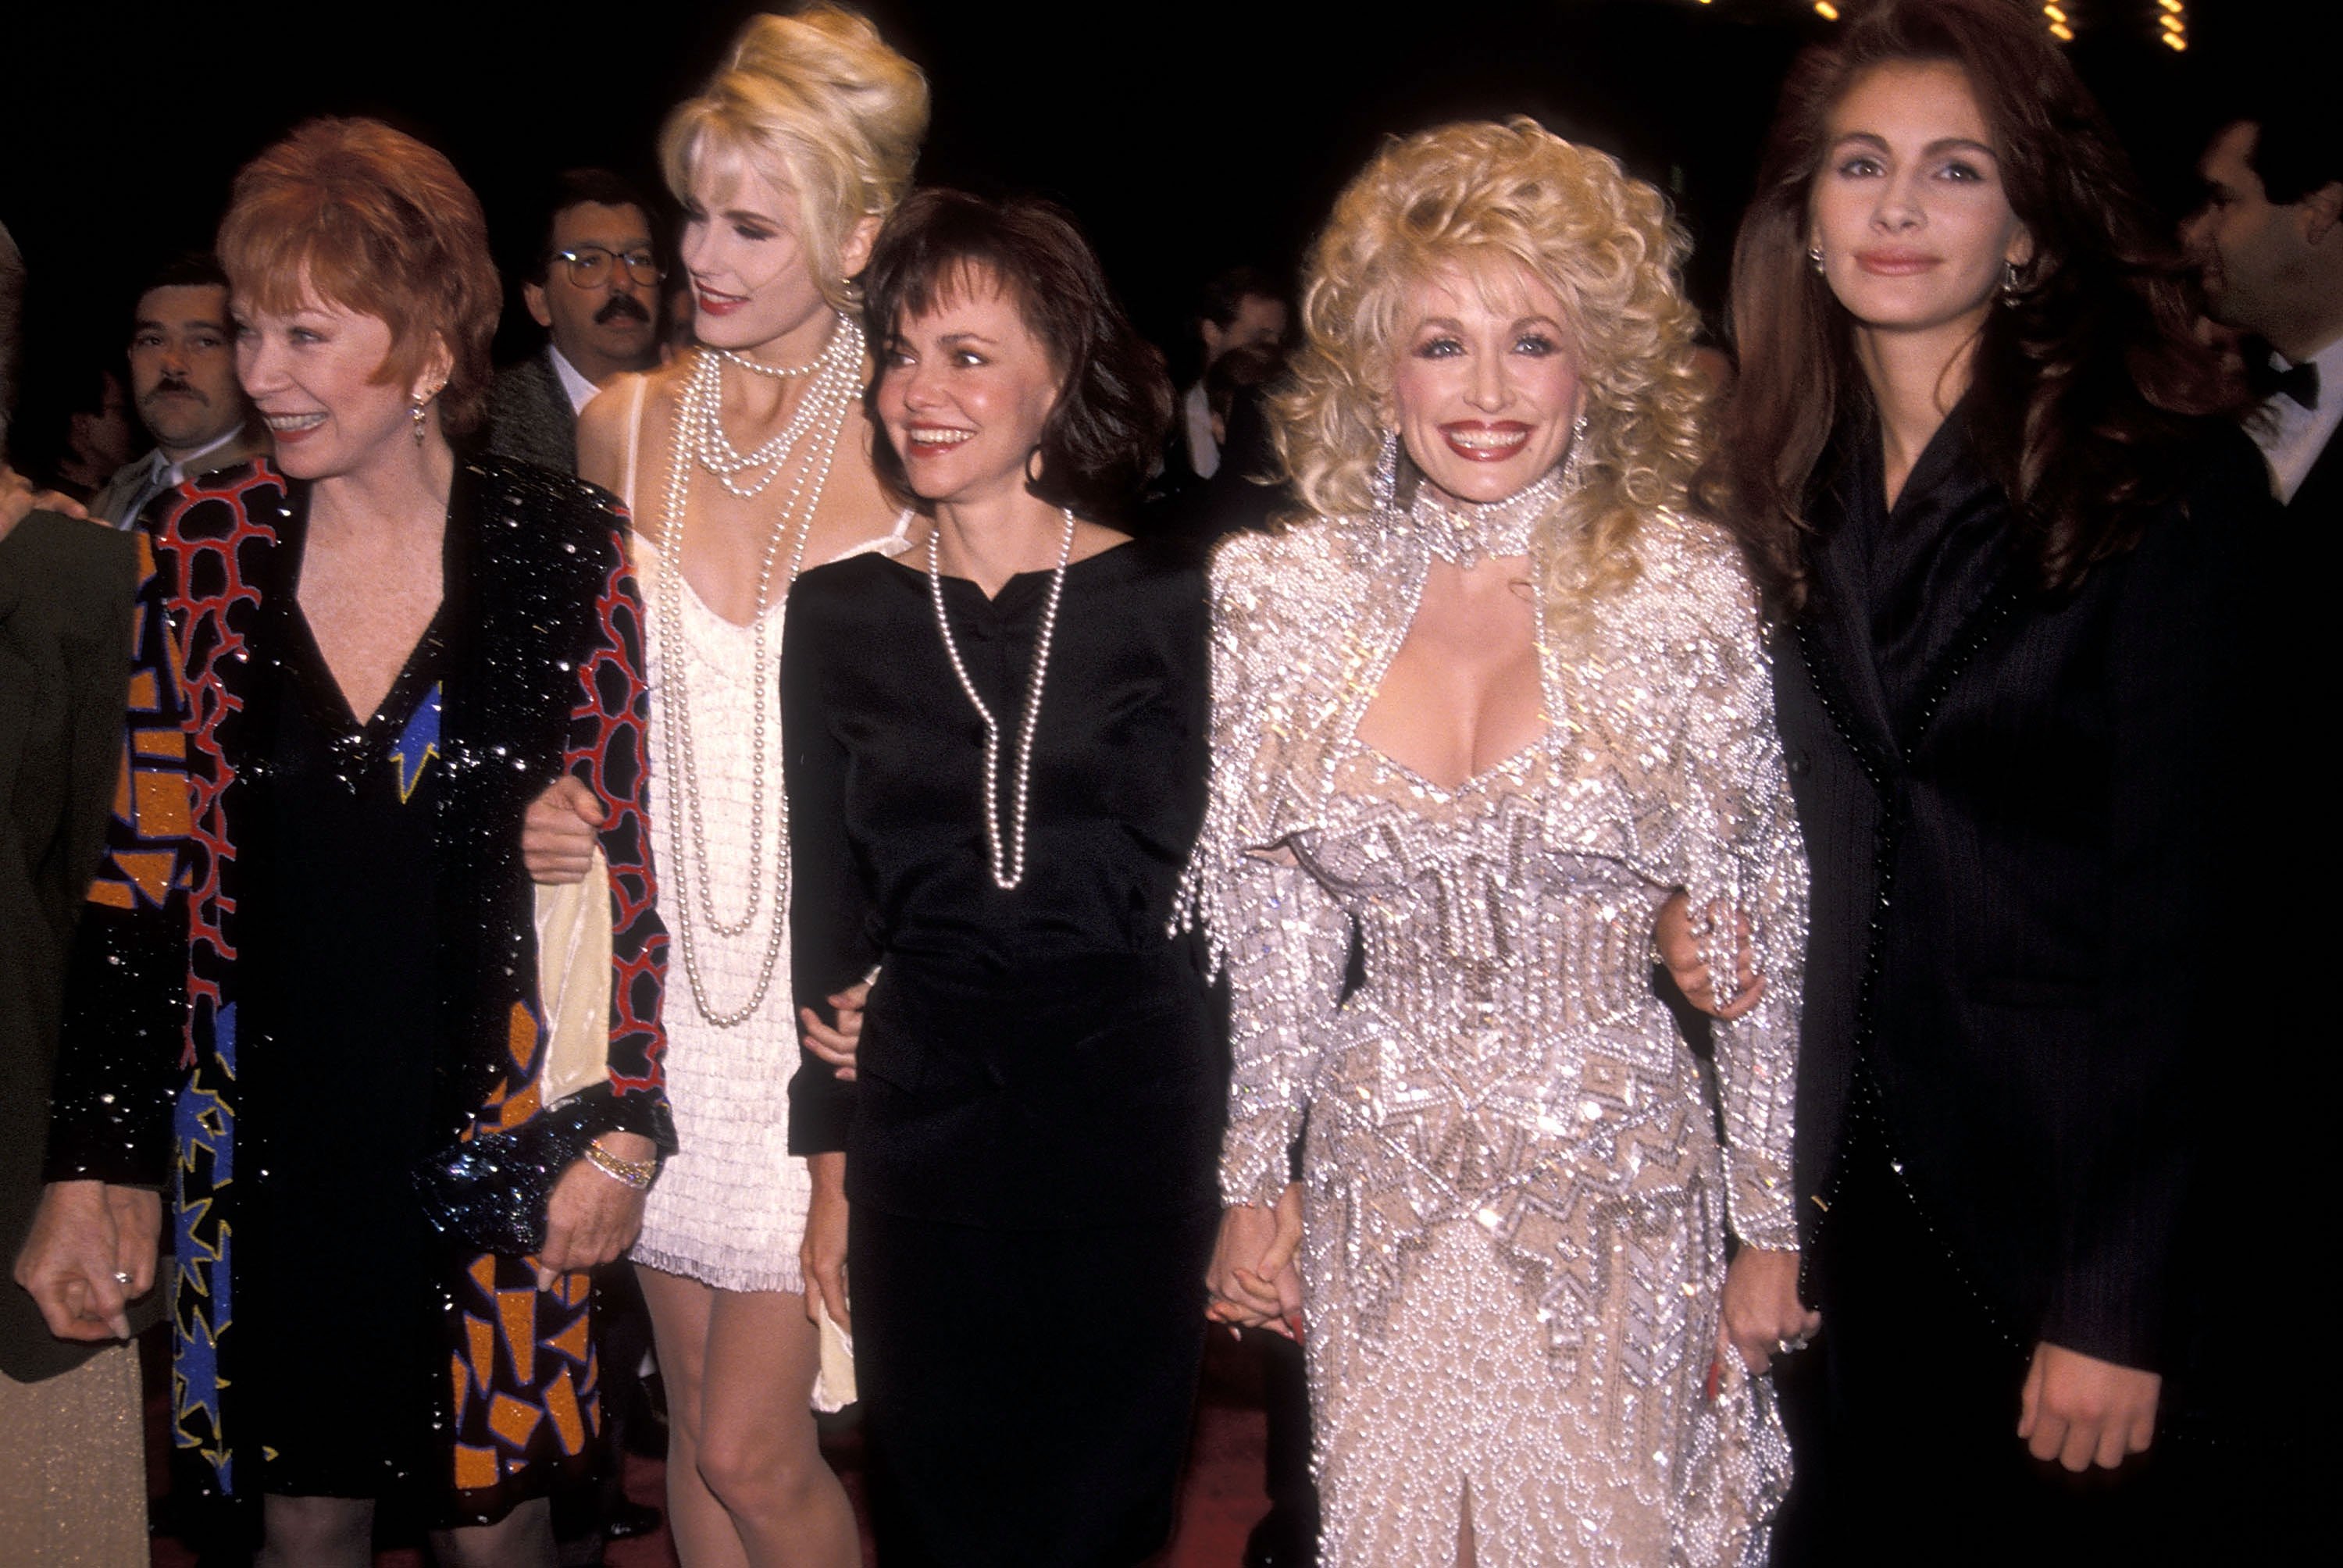 Cast of 'Steel Magnolias: (l-r) Shirley MacLaine, Daryl Hannah, Sally Field, Dolly Parton and Julia Roberts attend the 'Steel Magnolias' New York City Premiere